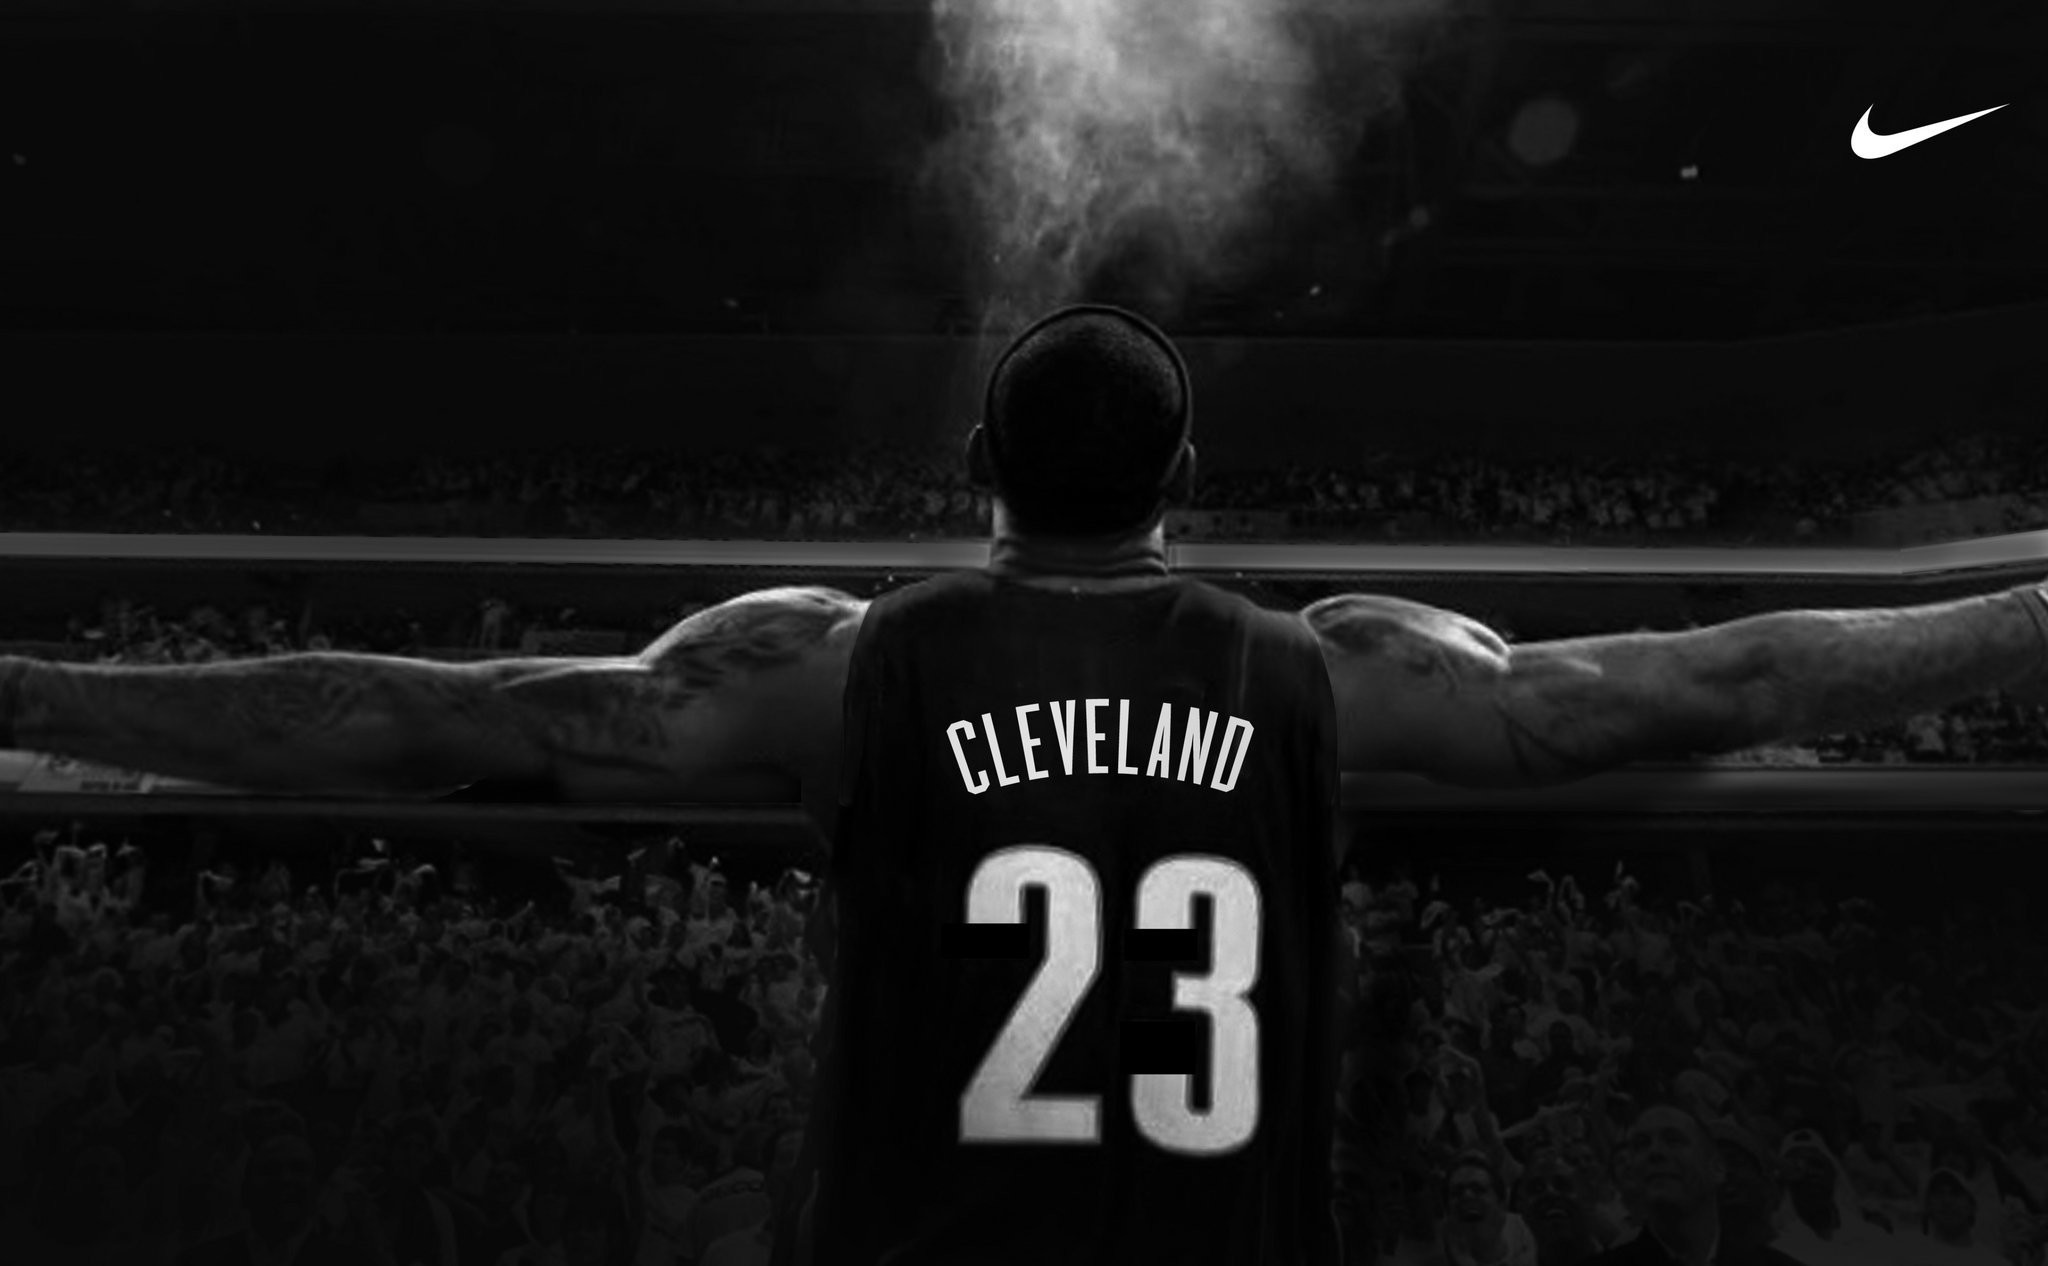 Lebron James Wallpaper Nike The Best Image In